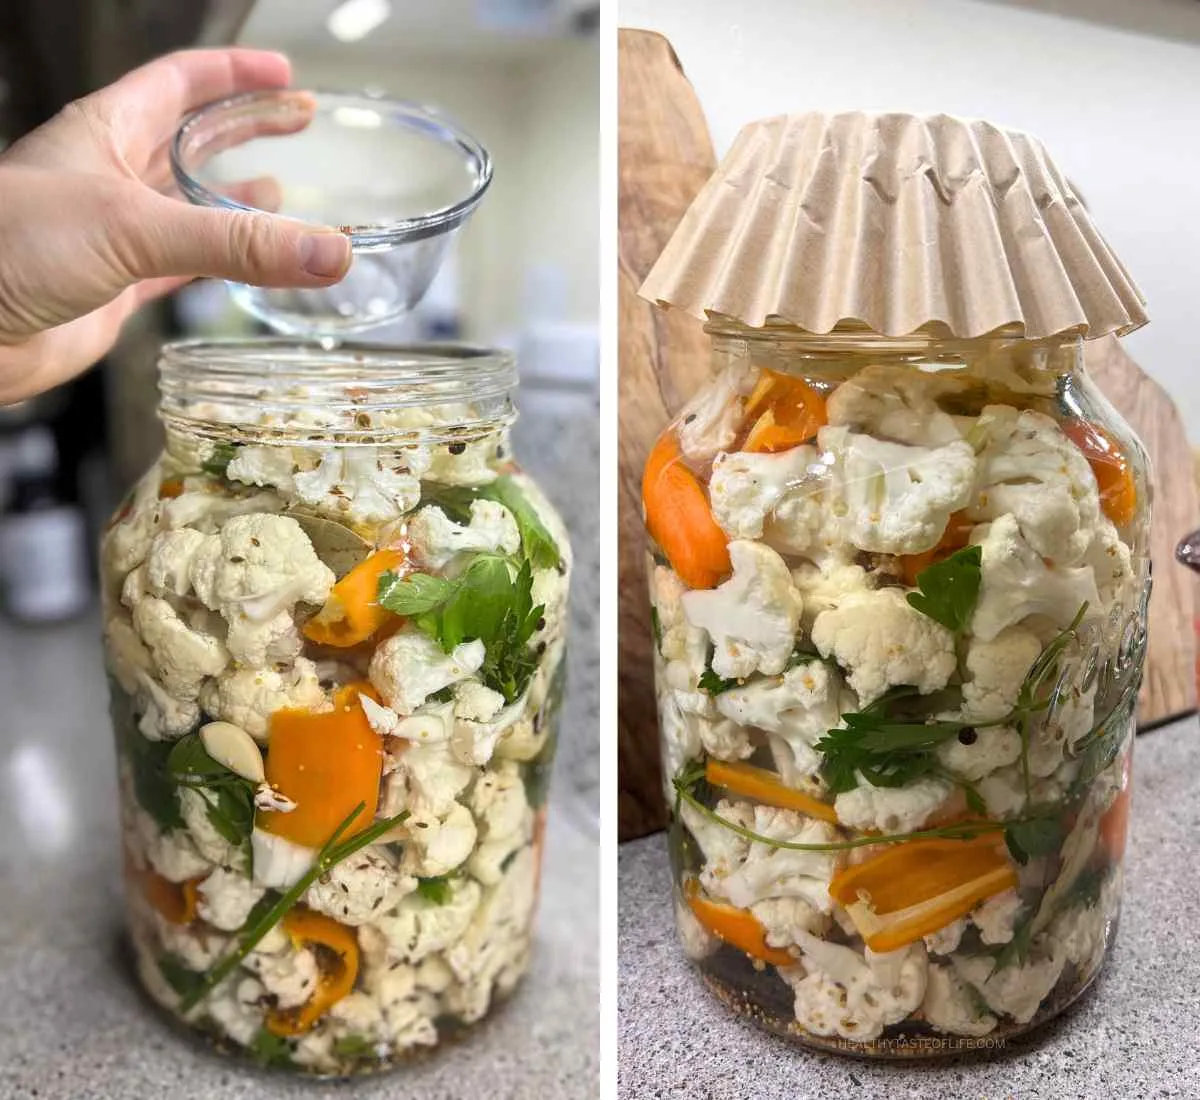 Picture showing a tip by placing a heavy glass cup or weight to keep the cauliflower under the brine in the jar.